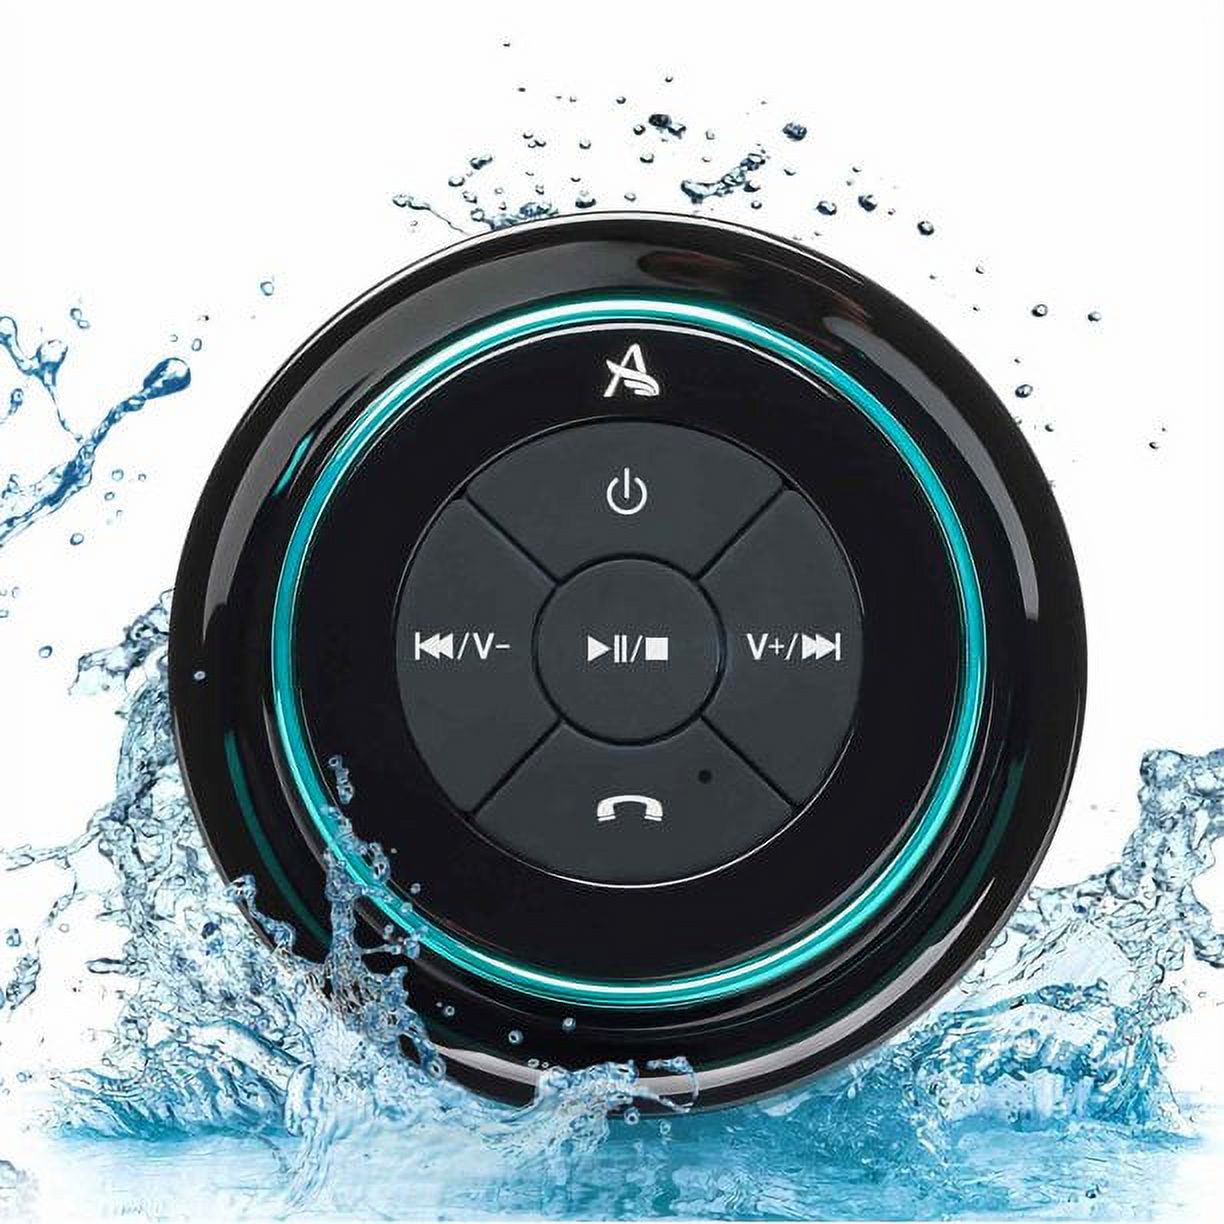 XLeader SoundAngel Mate - Premium 5W Bluetooth Shower Speaker IPX7 Waterproof Speaker with Suction Cup, 3D Crystal Sound & Bass, Perfect Mini Wireless Speakers for iPhone Pool Bathroom Gift-Blue - image 1 of 7